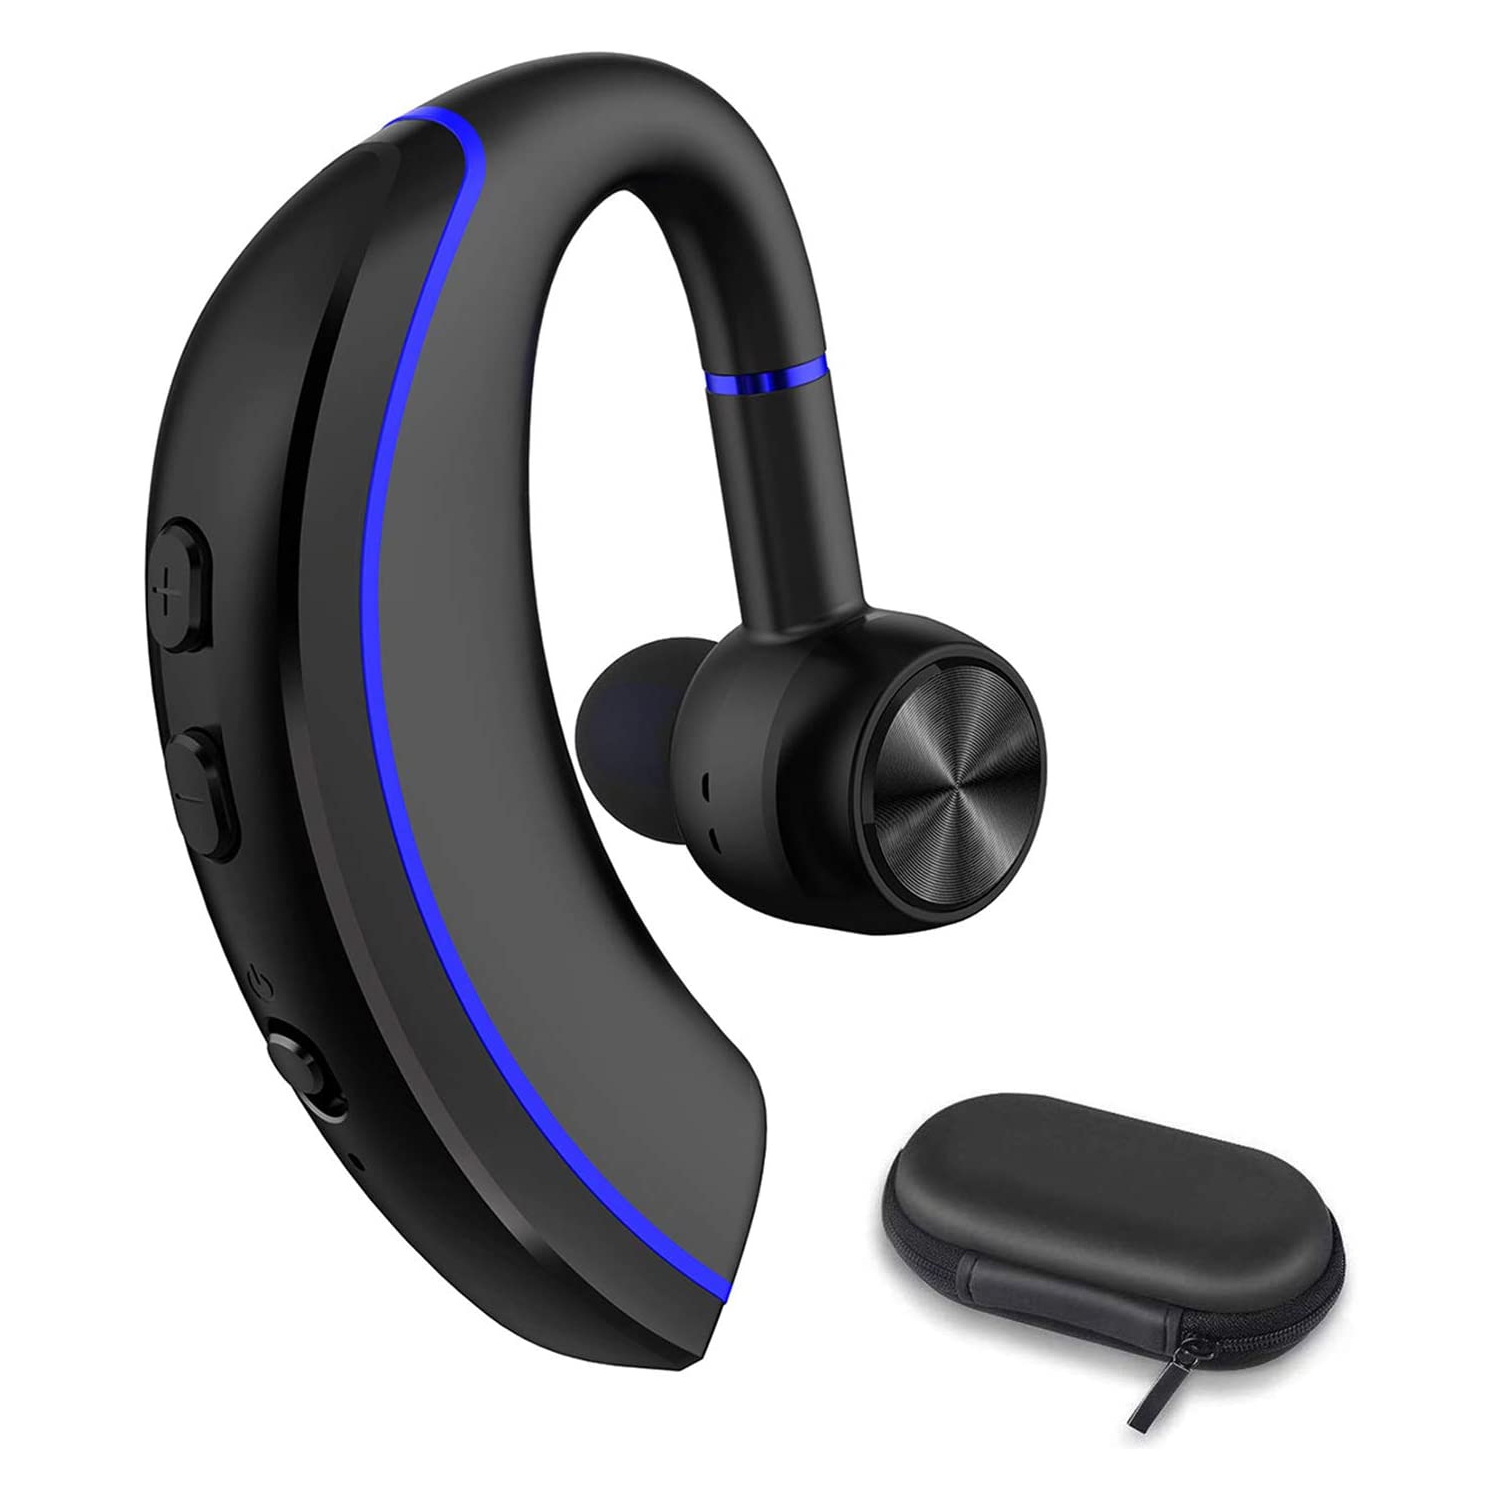 Bluetooth Headset, Bluetooth 5.0 Handsfree Earpiece 12h Talking Time with Mic, Business Headphones Wireless